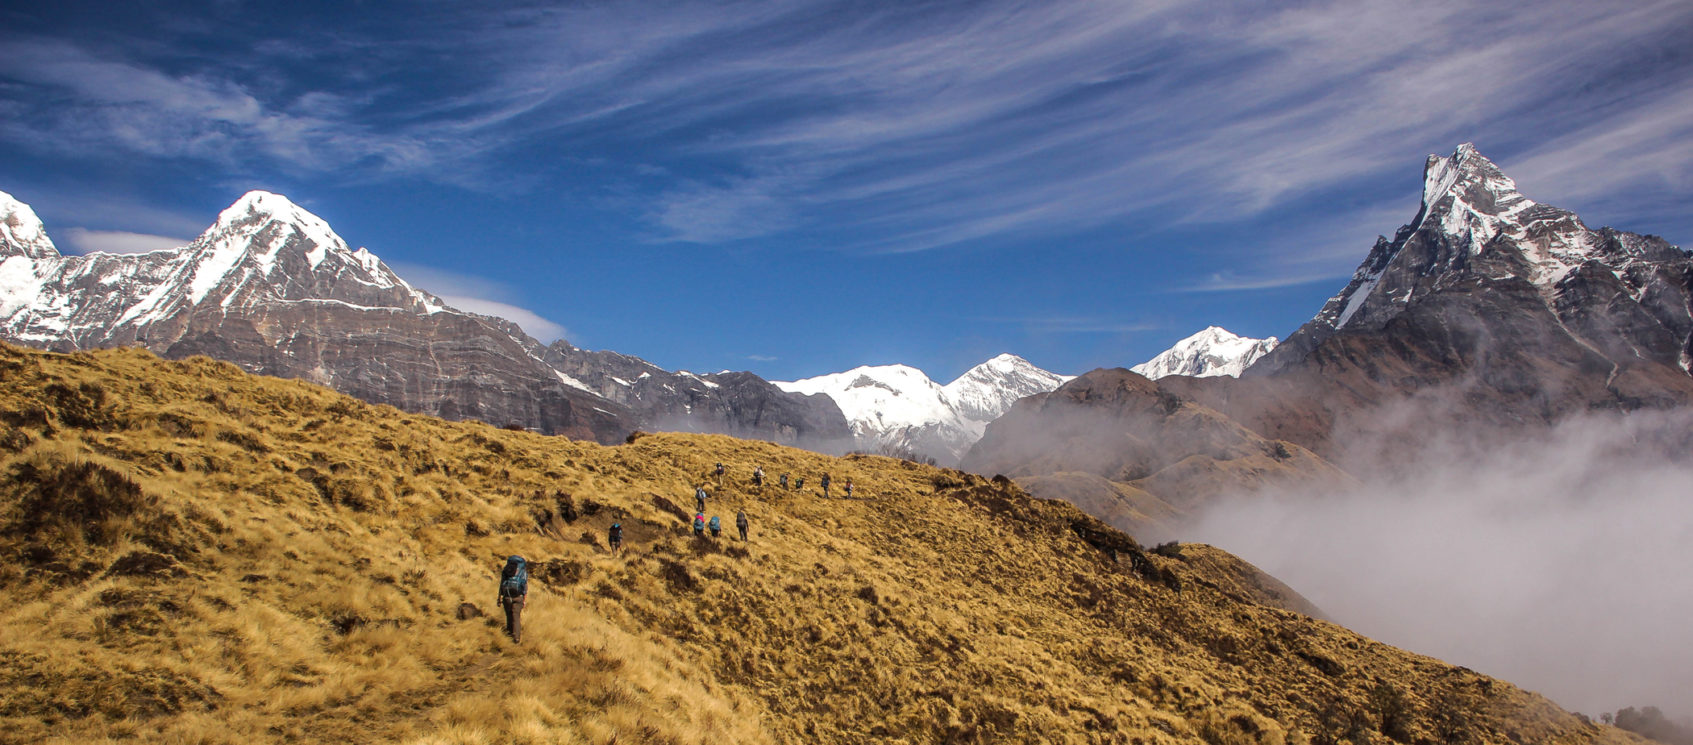 12 Hikers Trekking in rugged Nepal mountains